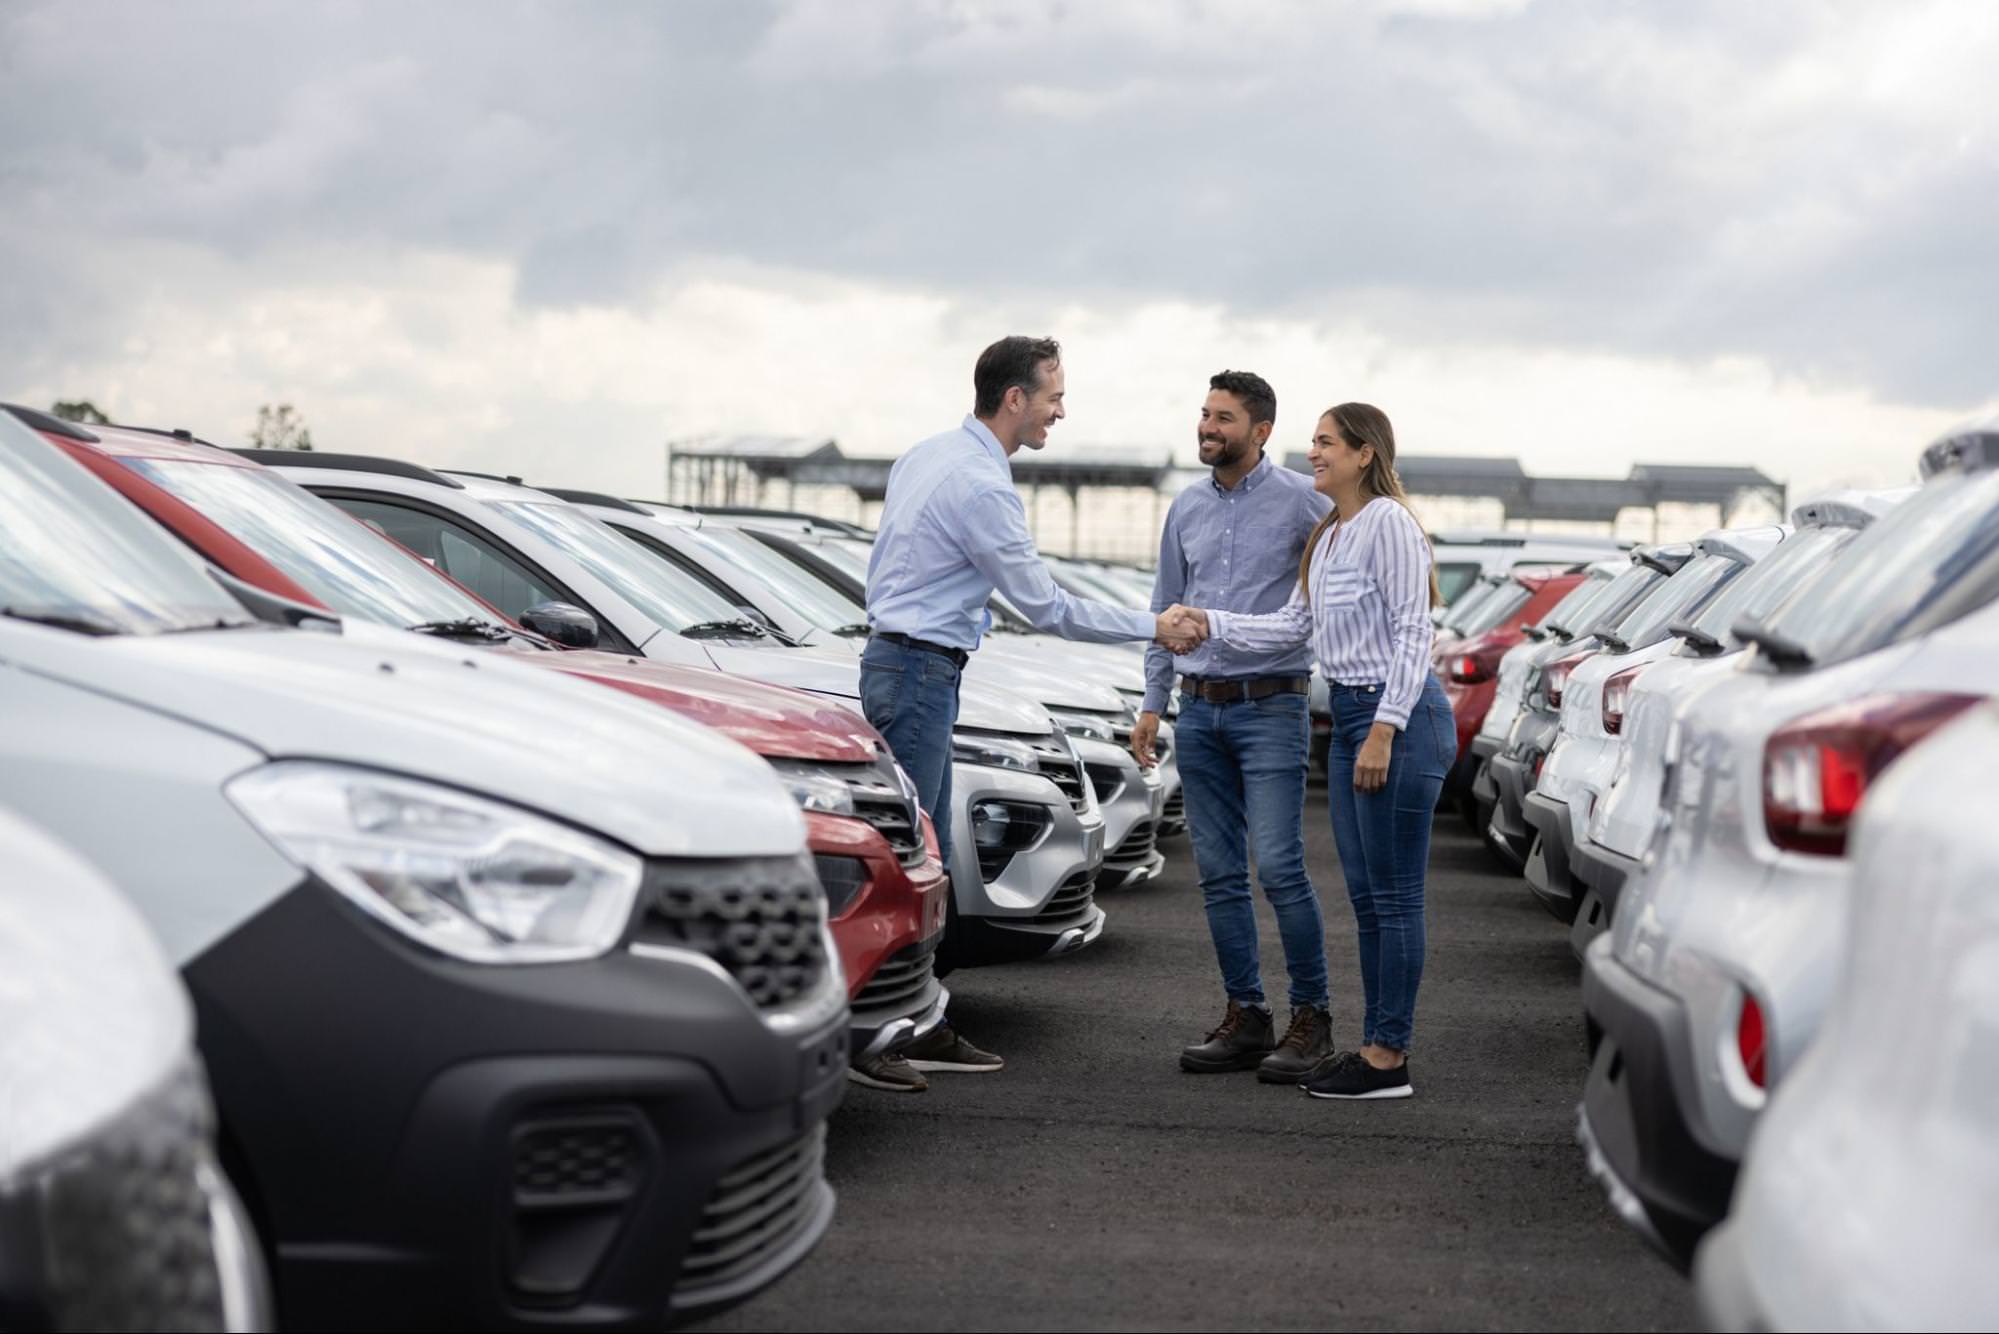 This scene depicts the closing of a car deal, showcasing successful customer interaction and relationship-building in a sales environment.